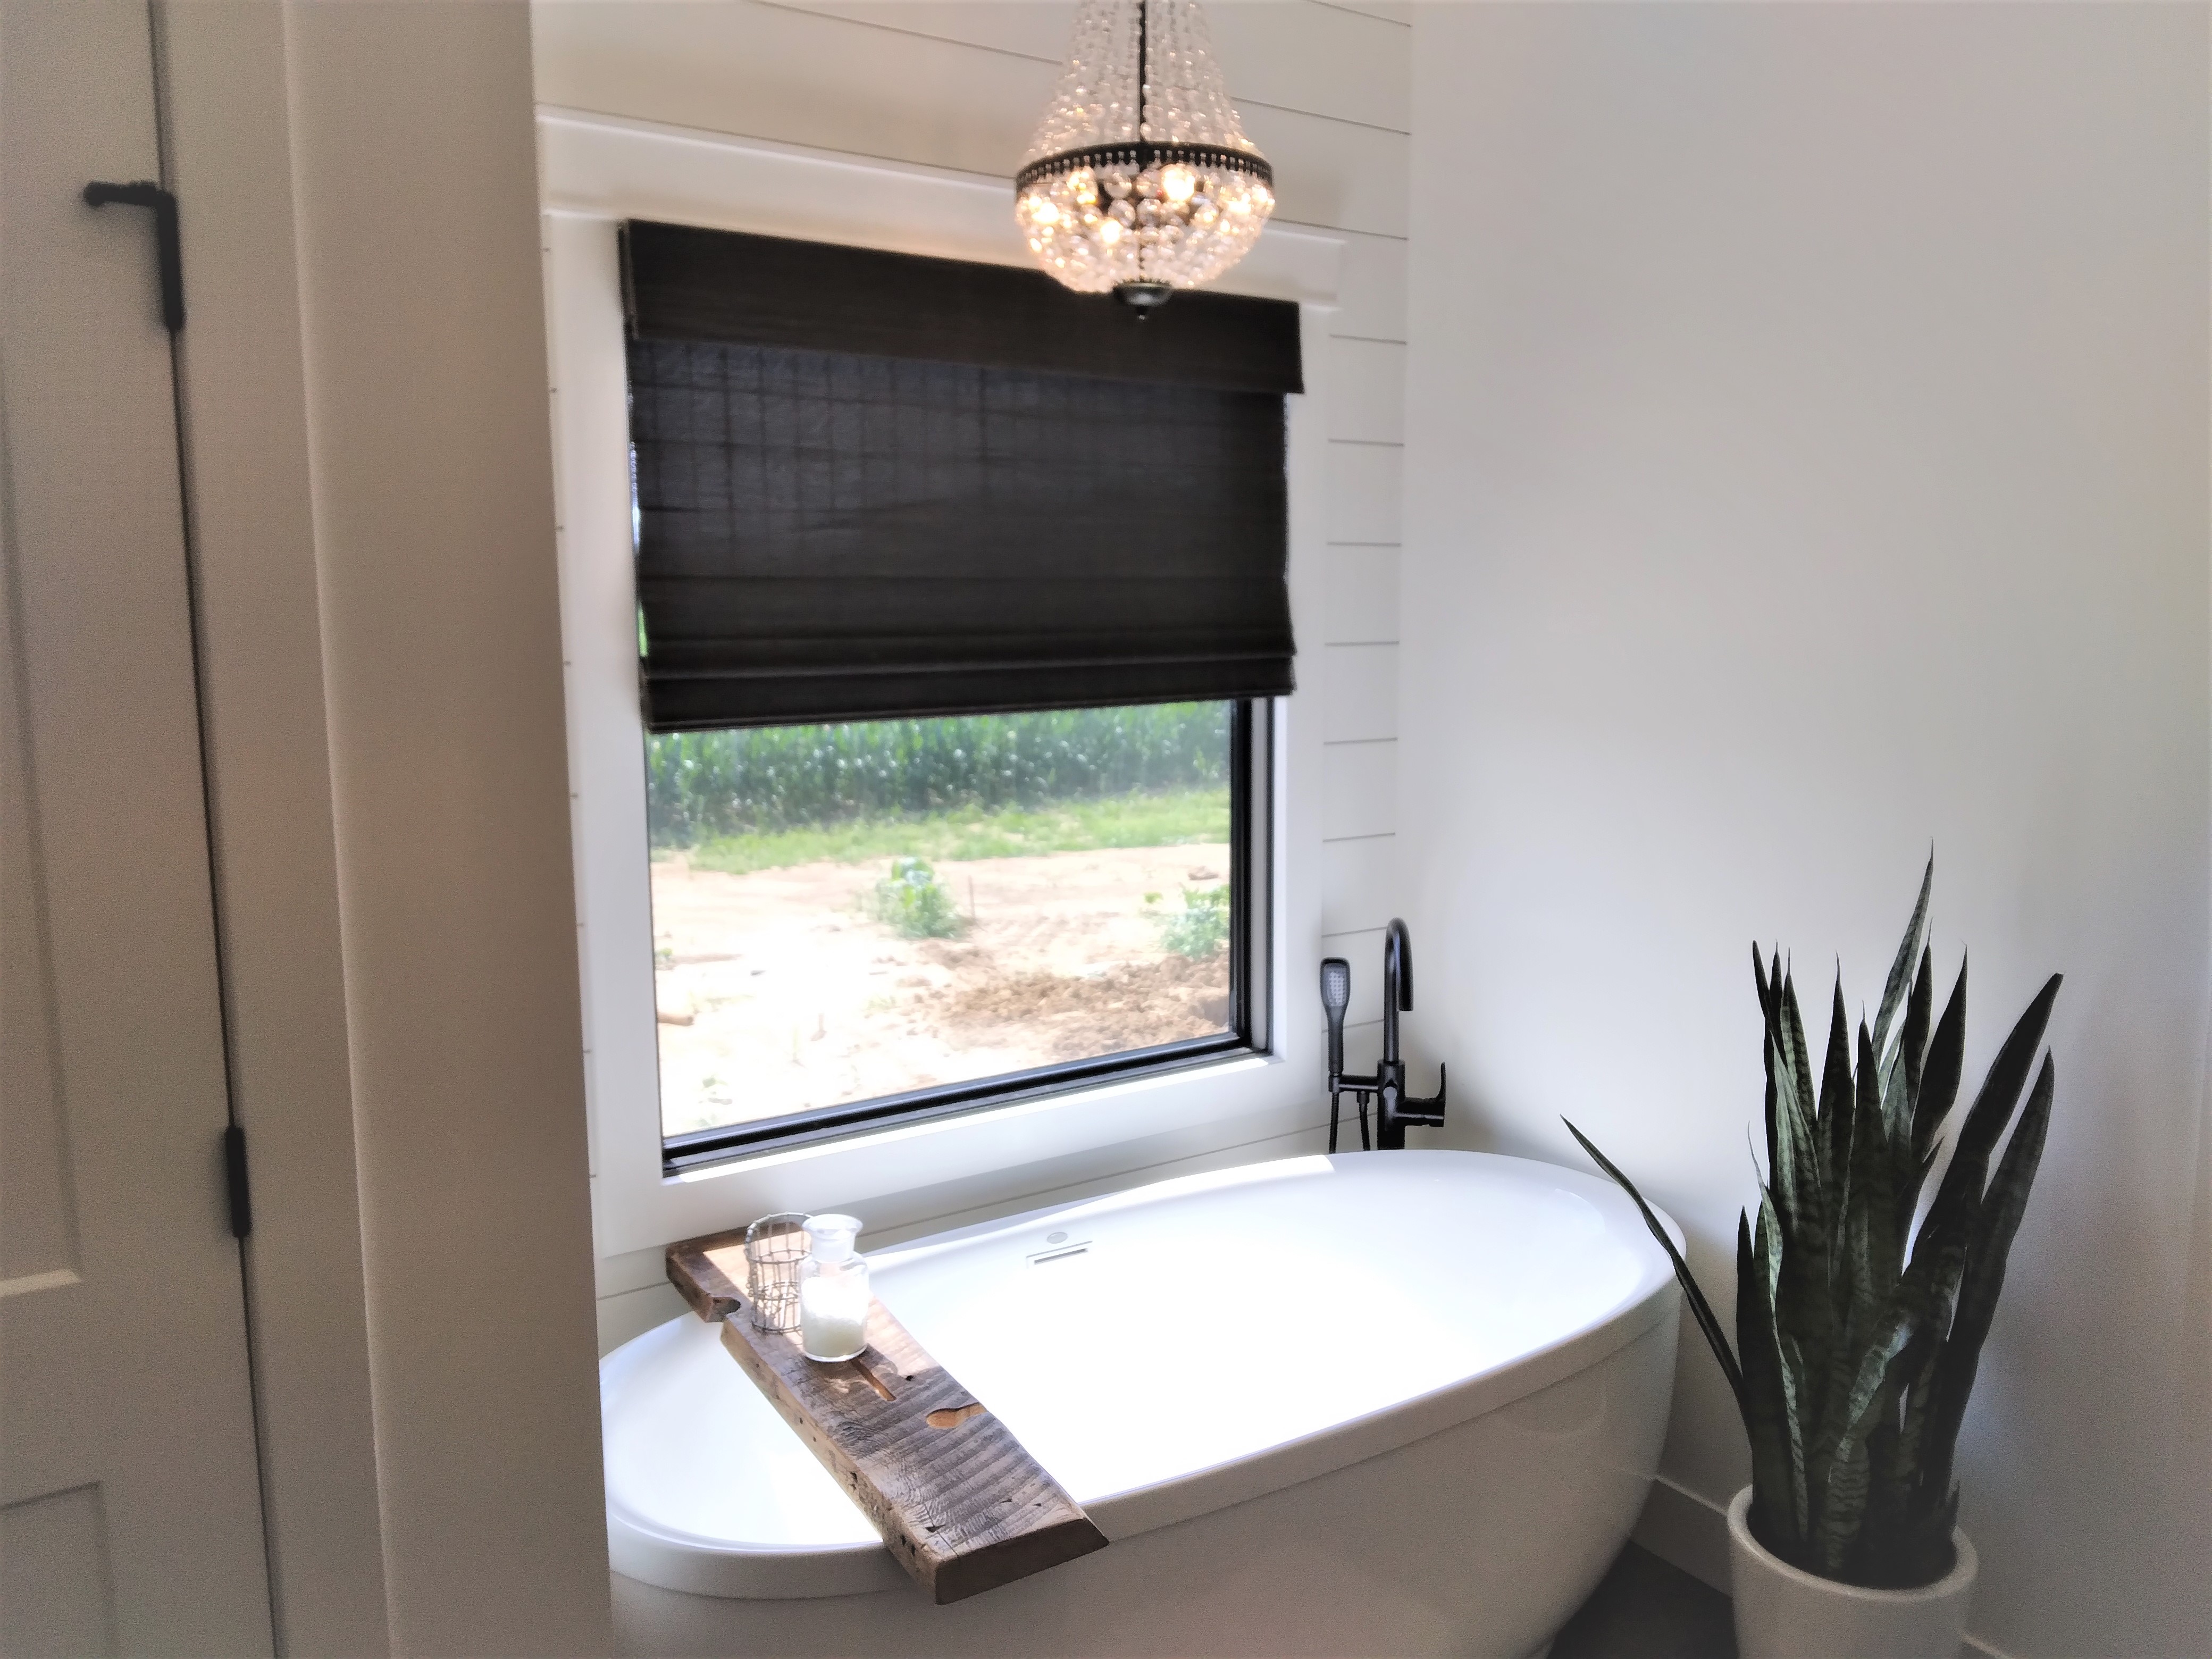 Black cordless light-filtering natural shades in Springfield Illinois bathroom.  BudgetBlinds  WindowCoverings  NaturalShades  SpringfieldIllinois